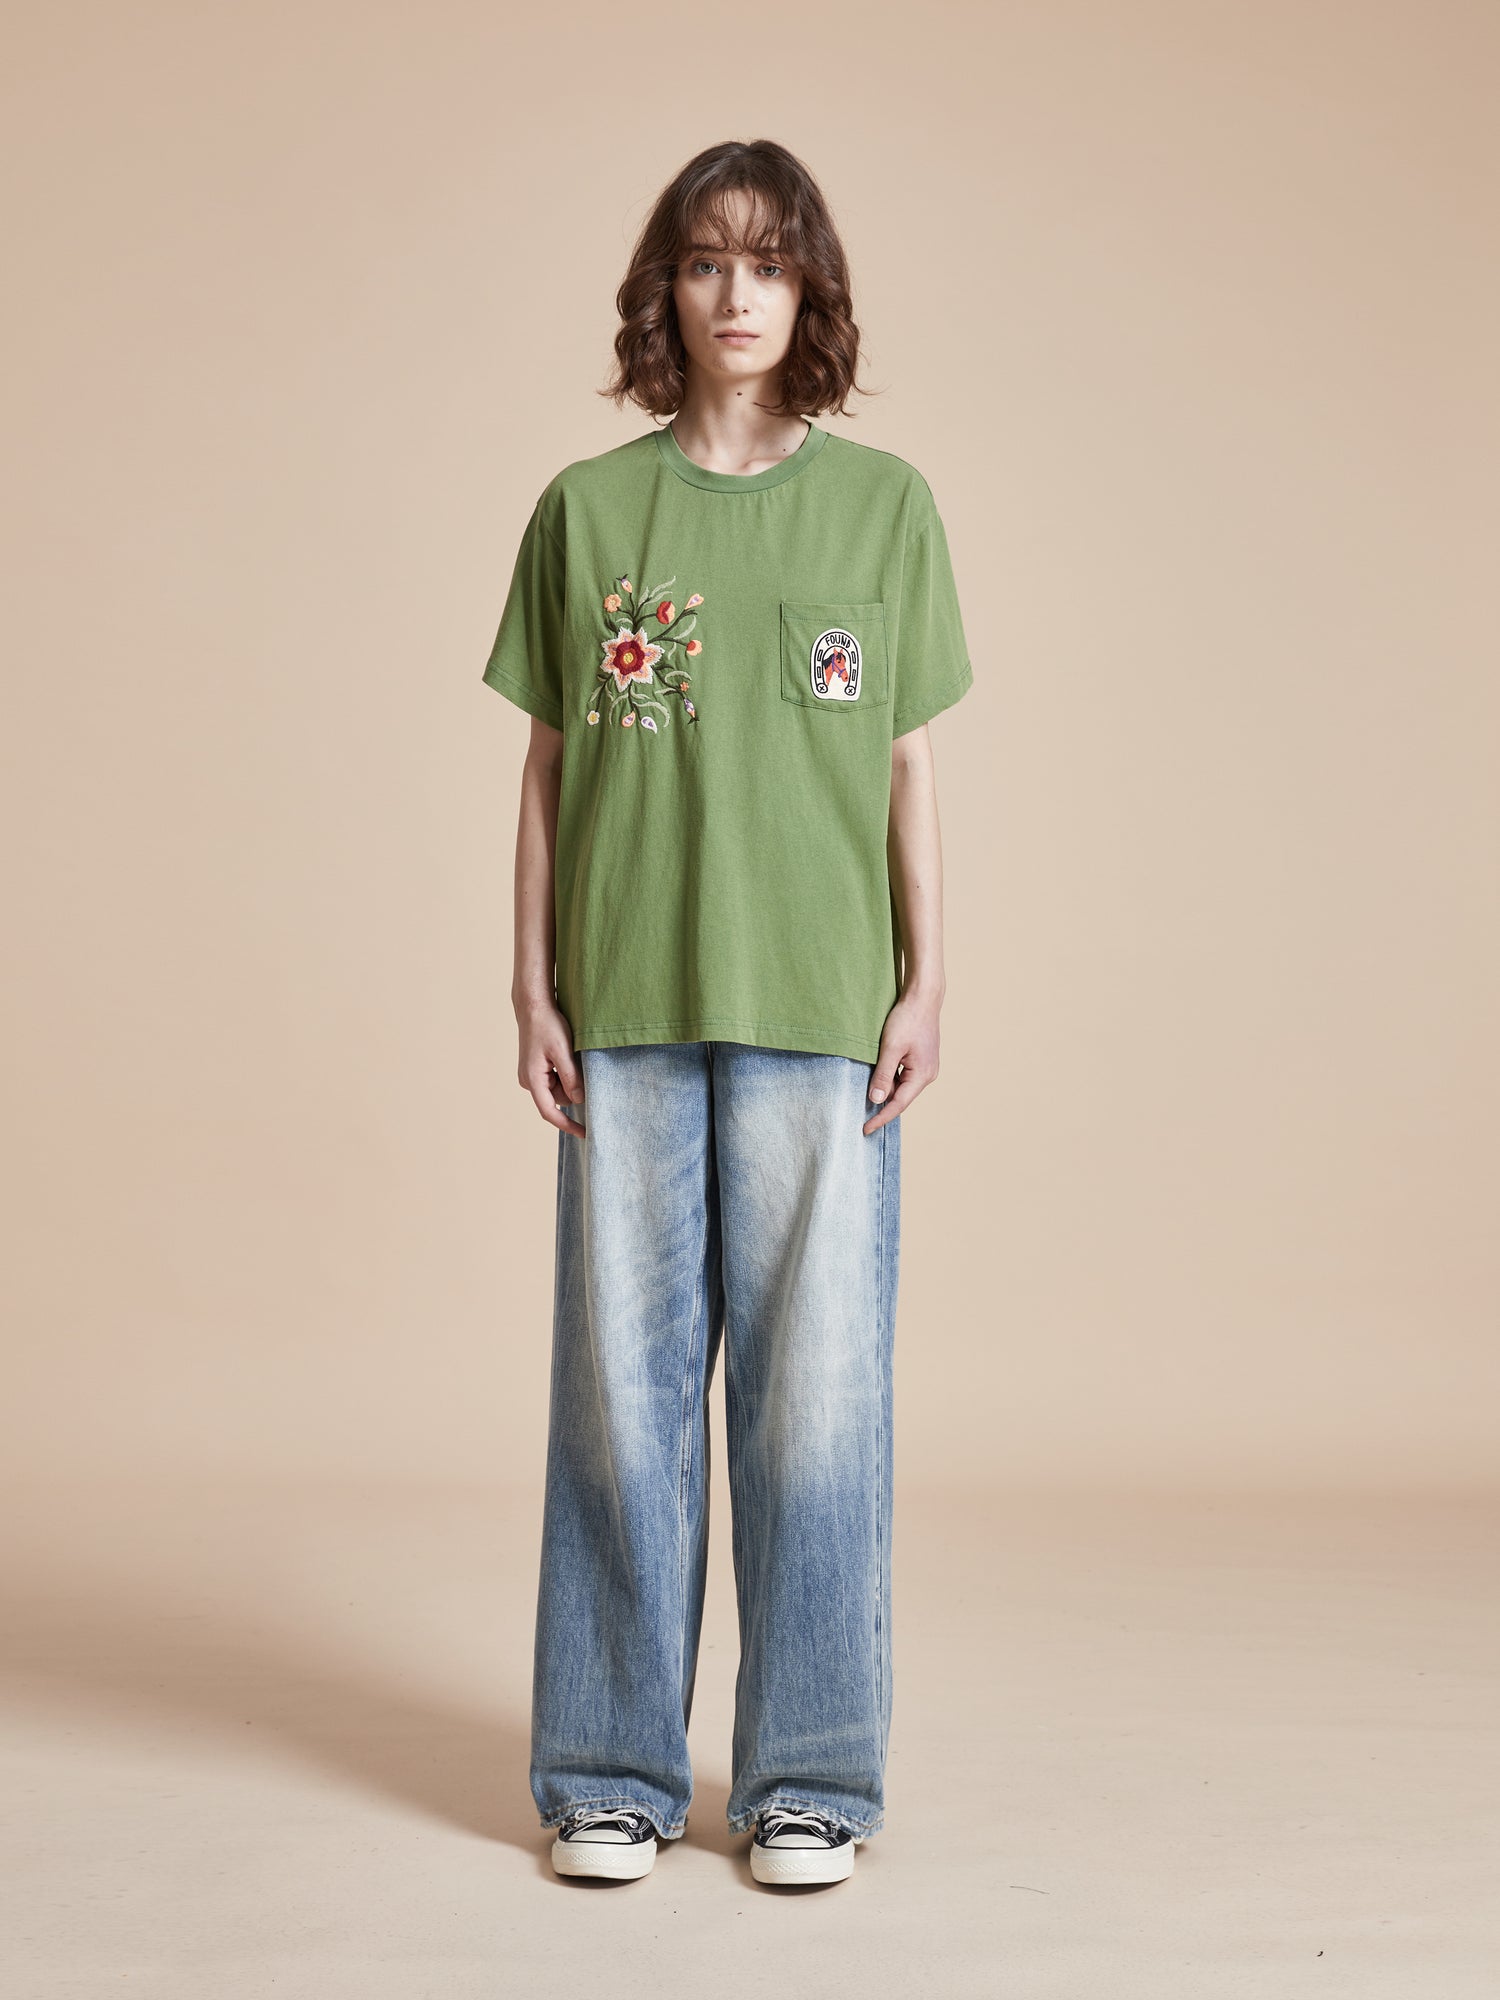 A woman wearing a Found Pine Needle Farm Tee and jeans.